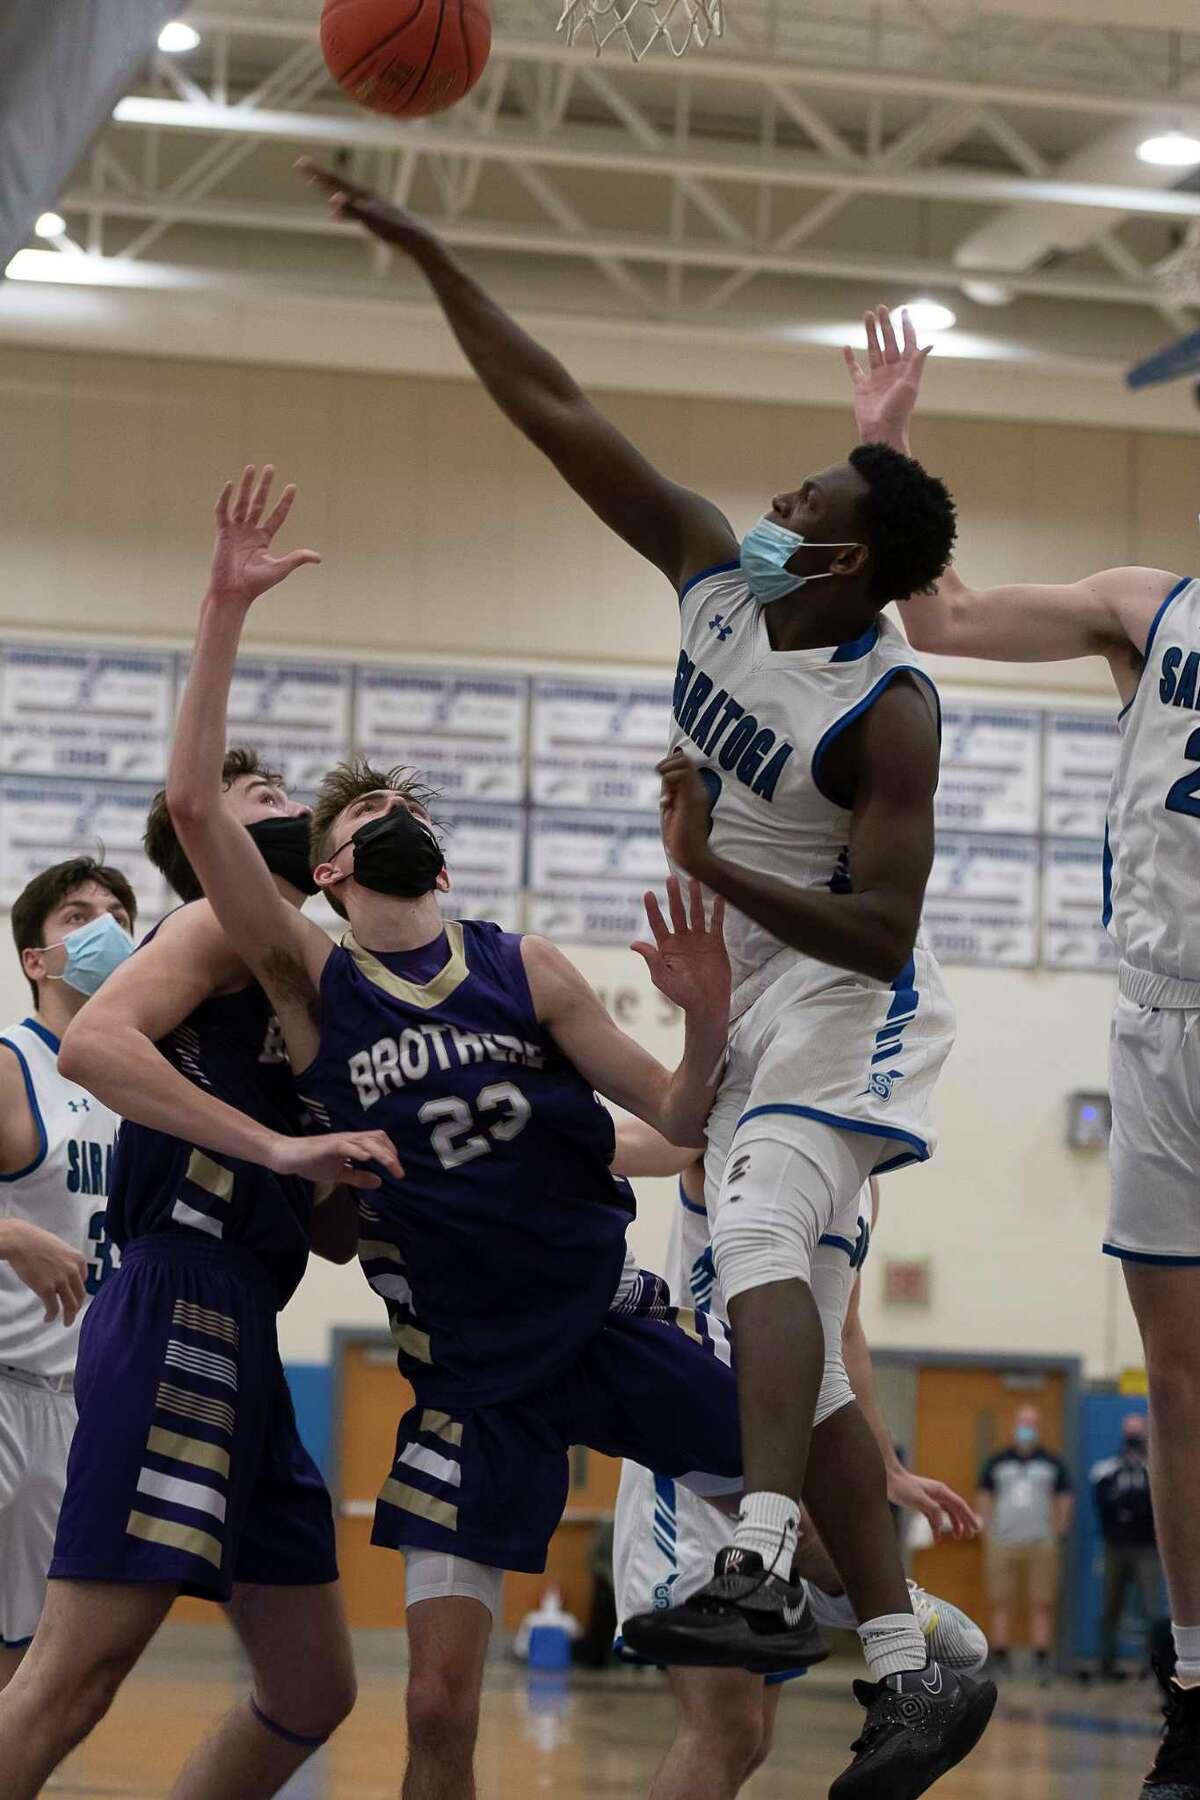 Saratoga's Kaleb Lewis blocks a shot from CBA's Hagen Foley during a game on Wednesday, Feb. 24, 2021, in Saratoga Springs, N.Y. (Jenn March, Special to the Times Union)